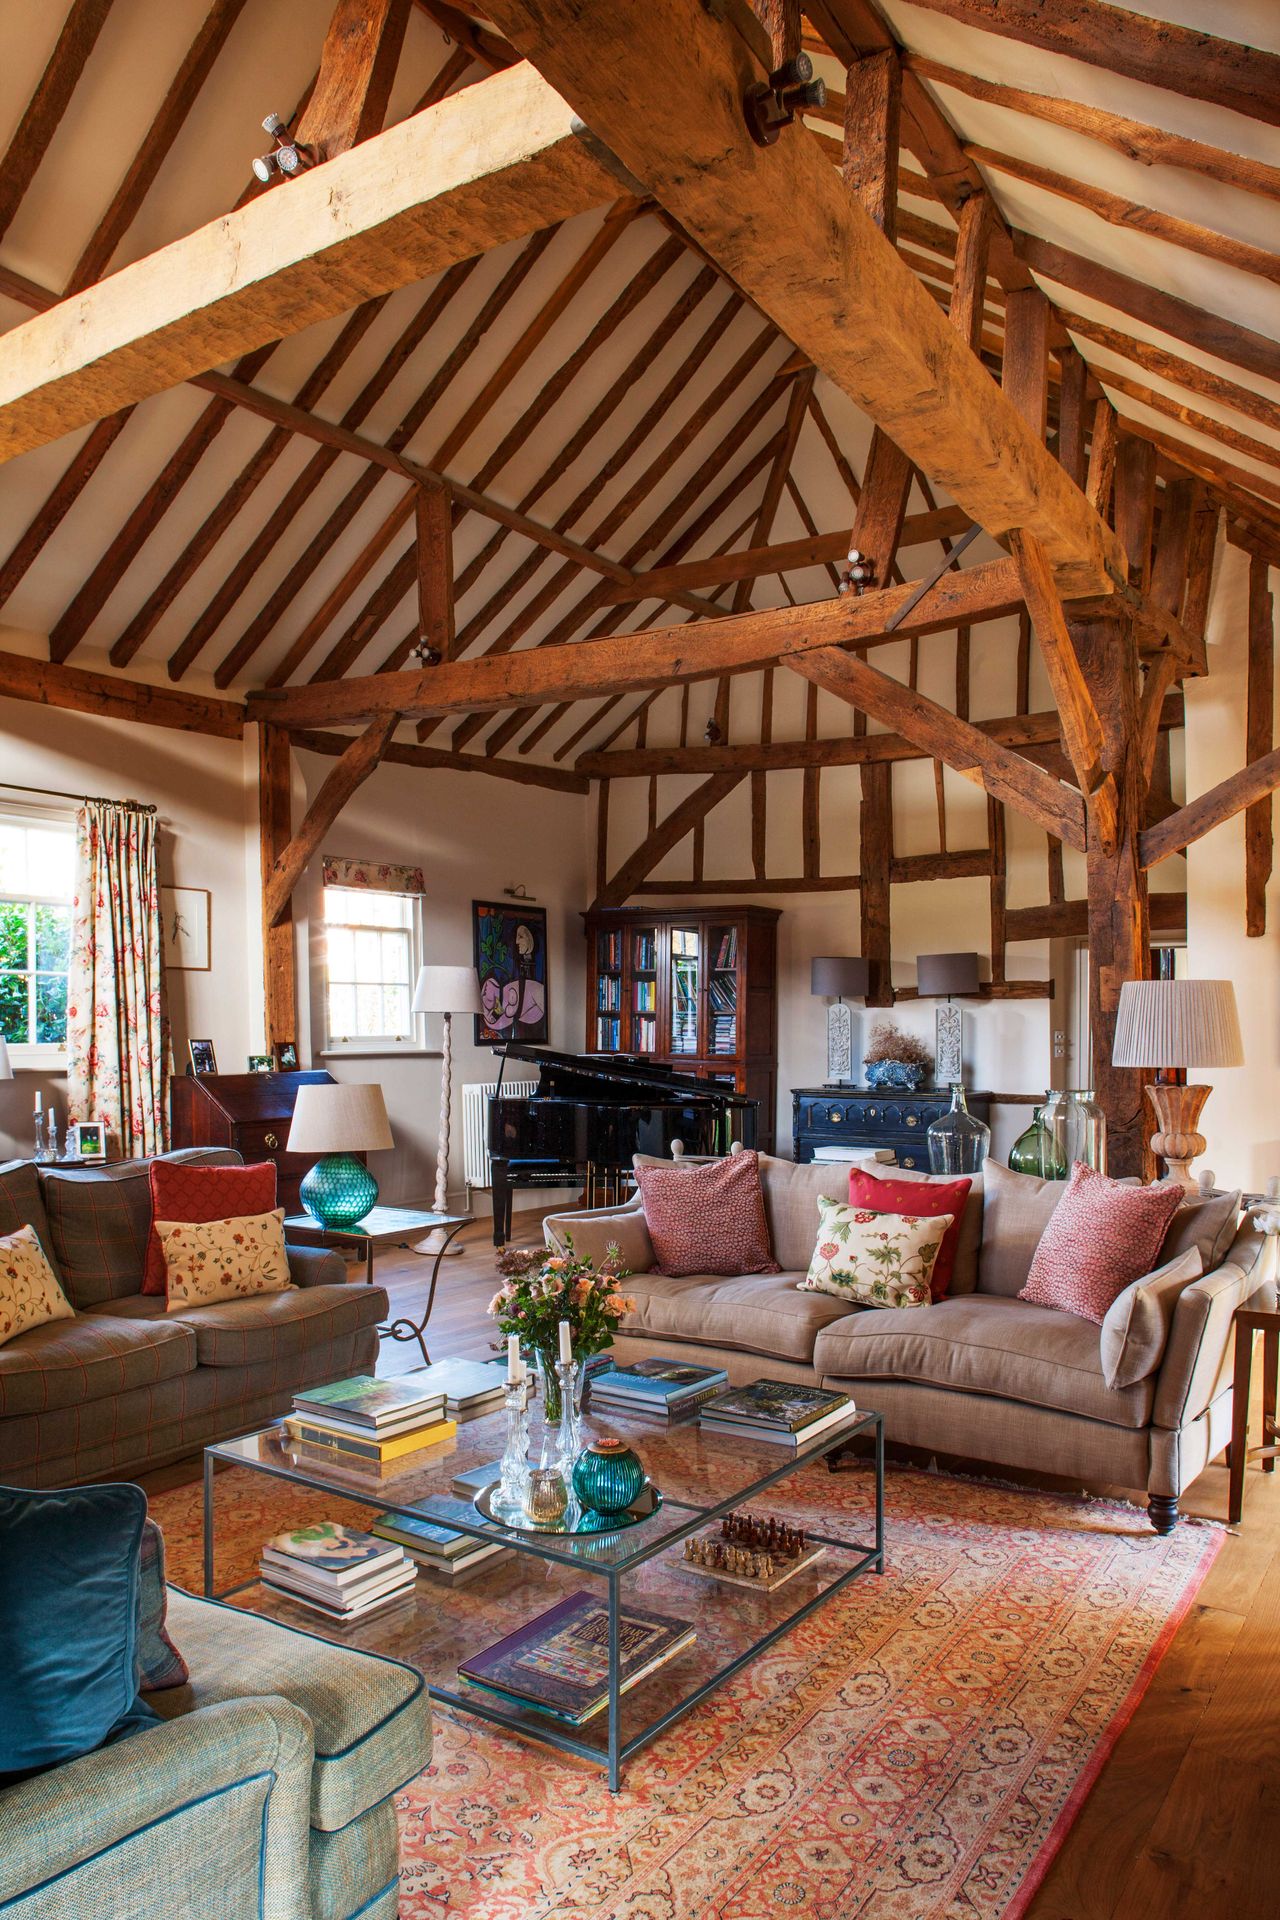 Real home: explore this converted coach house with its stunning timber ...